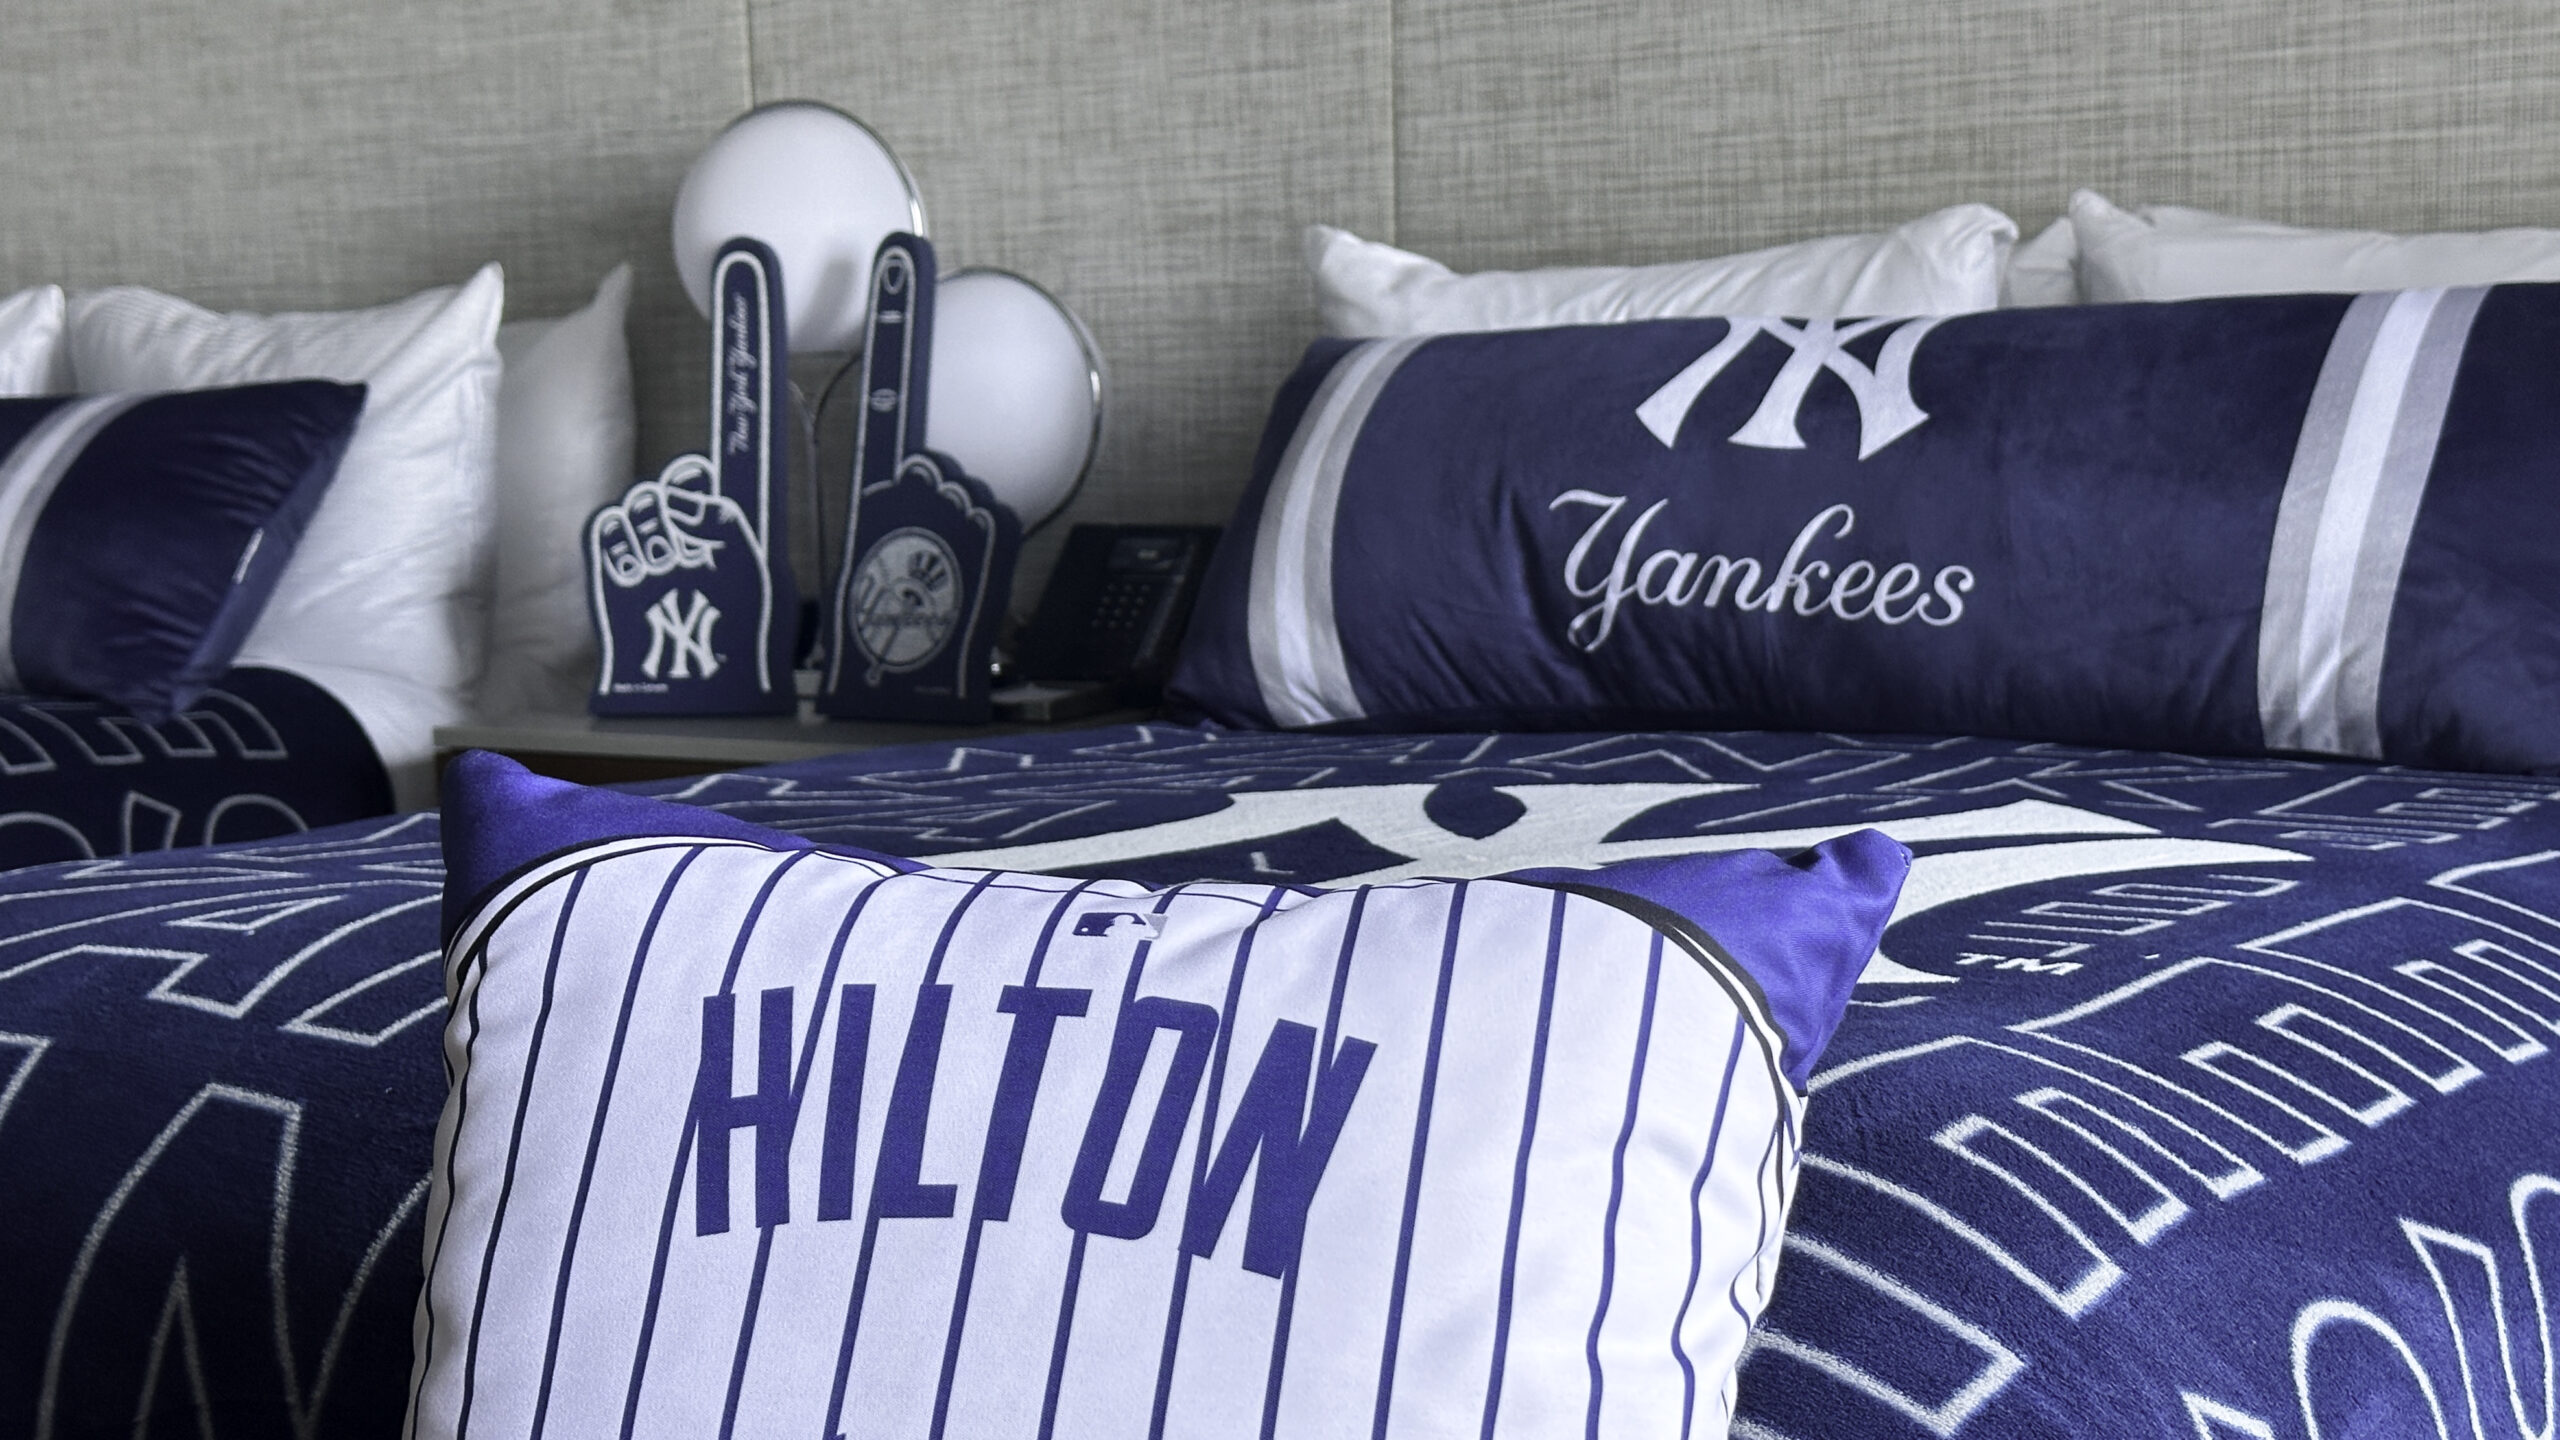 Hilton Launches Yankees Themed Grand Slam Suites